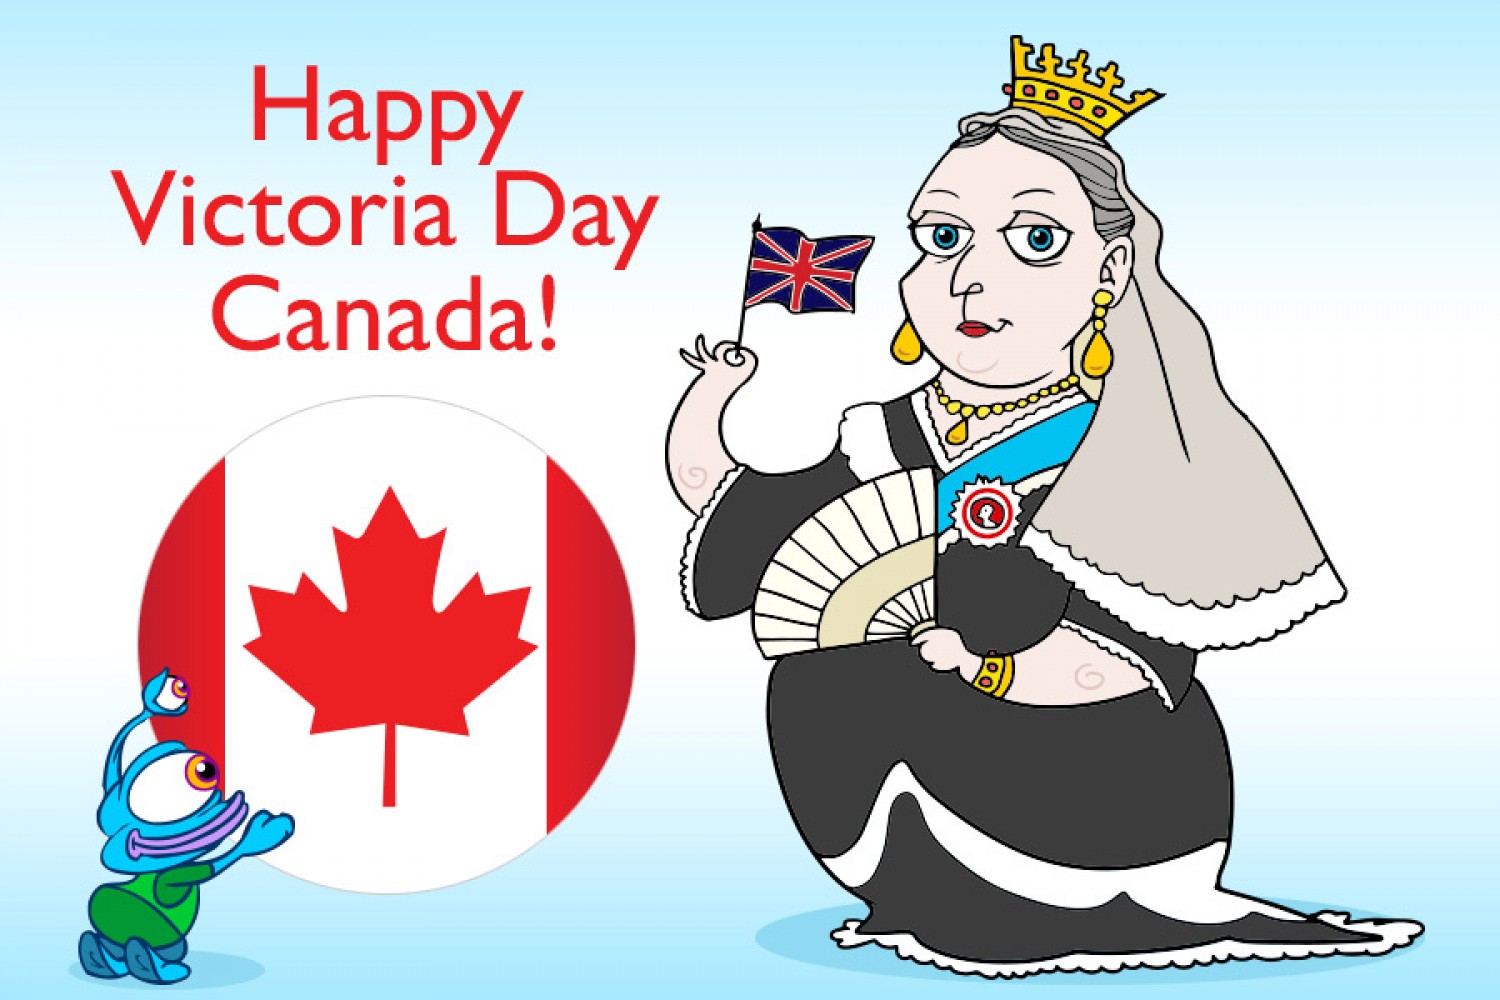 Hey Canada! Get ready to celebrate Victoria Day on Monday, May 23News